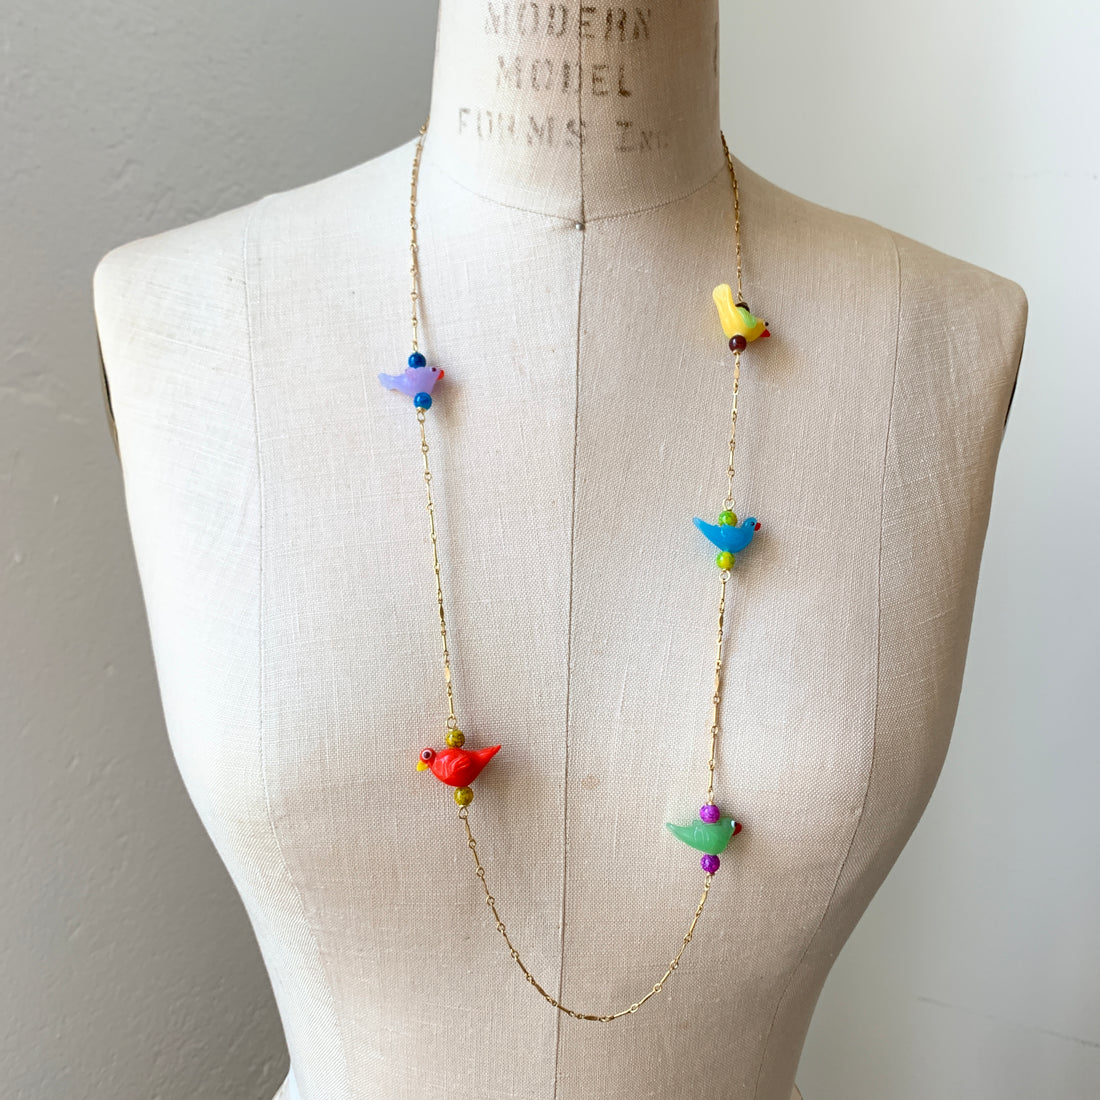 A Little Bird Told Me Necklace - Colorful